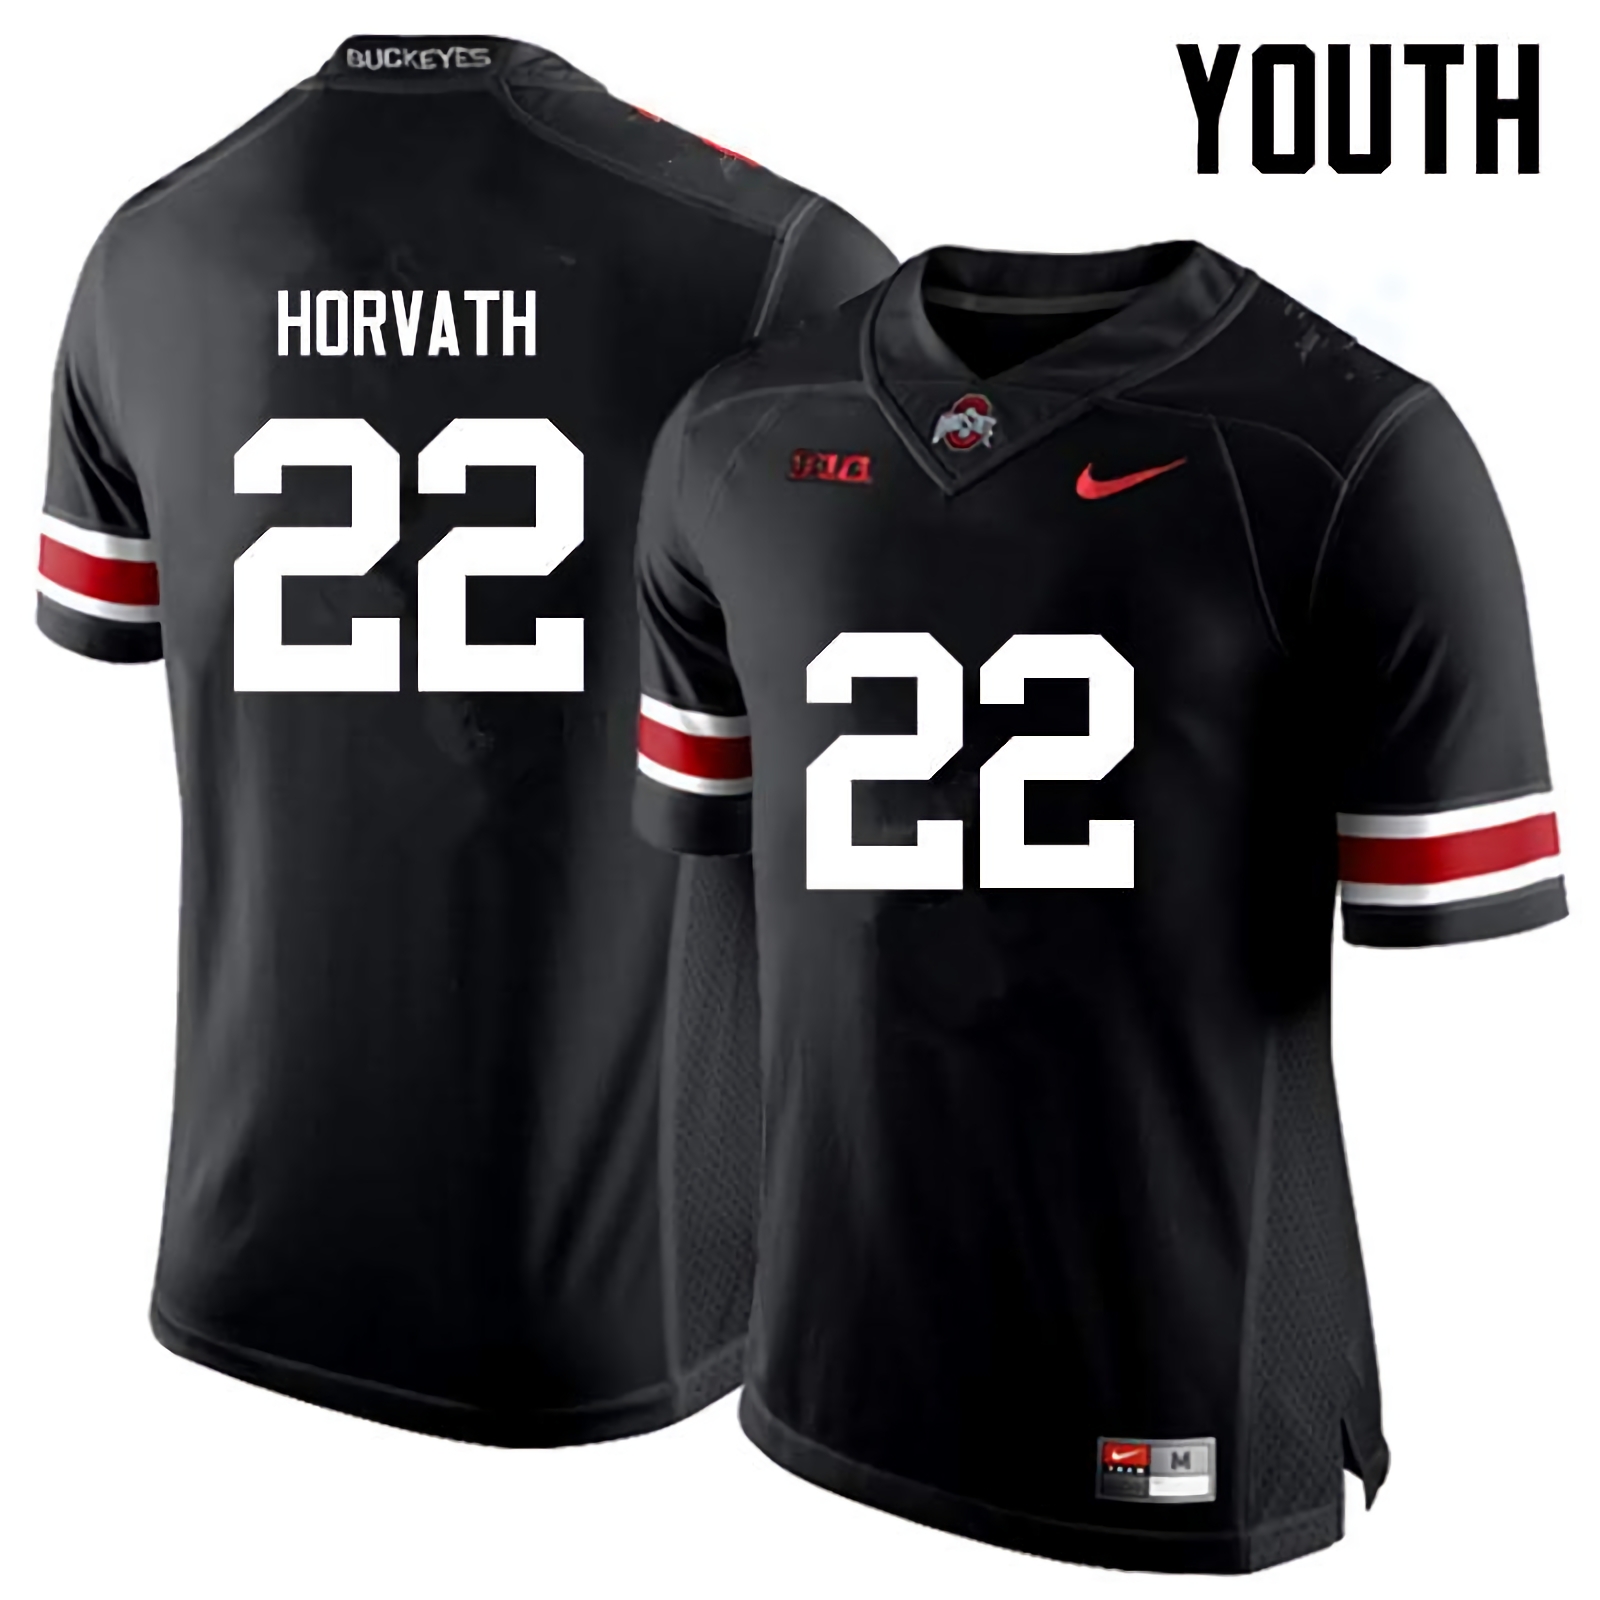 Les Horvath Ohio State Buckeyes Youth NCAA #22 Nike Black College Stitched Football Jersey NQF1556JI